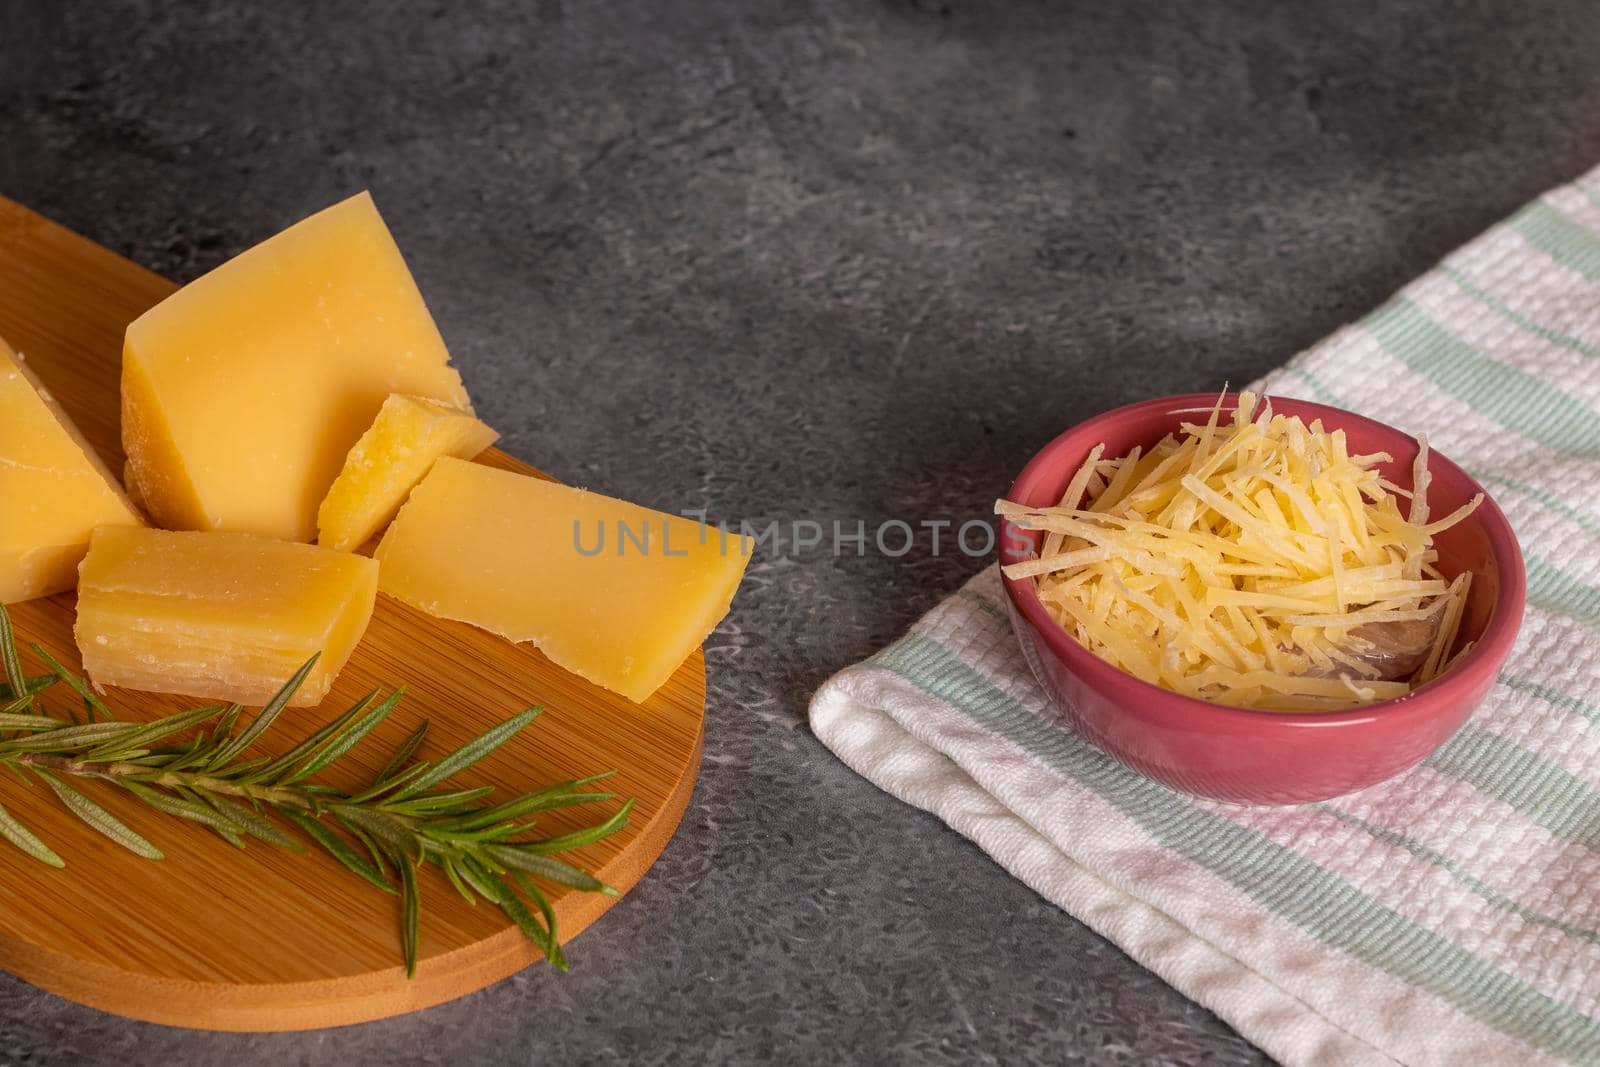 Tray with pieces of Parmesan cheese and fine herbs